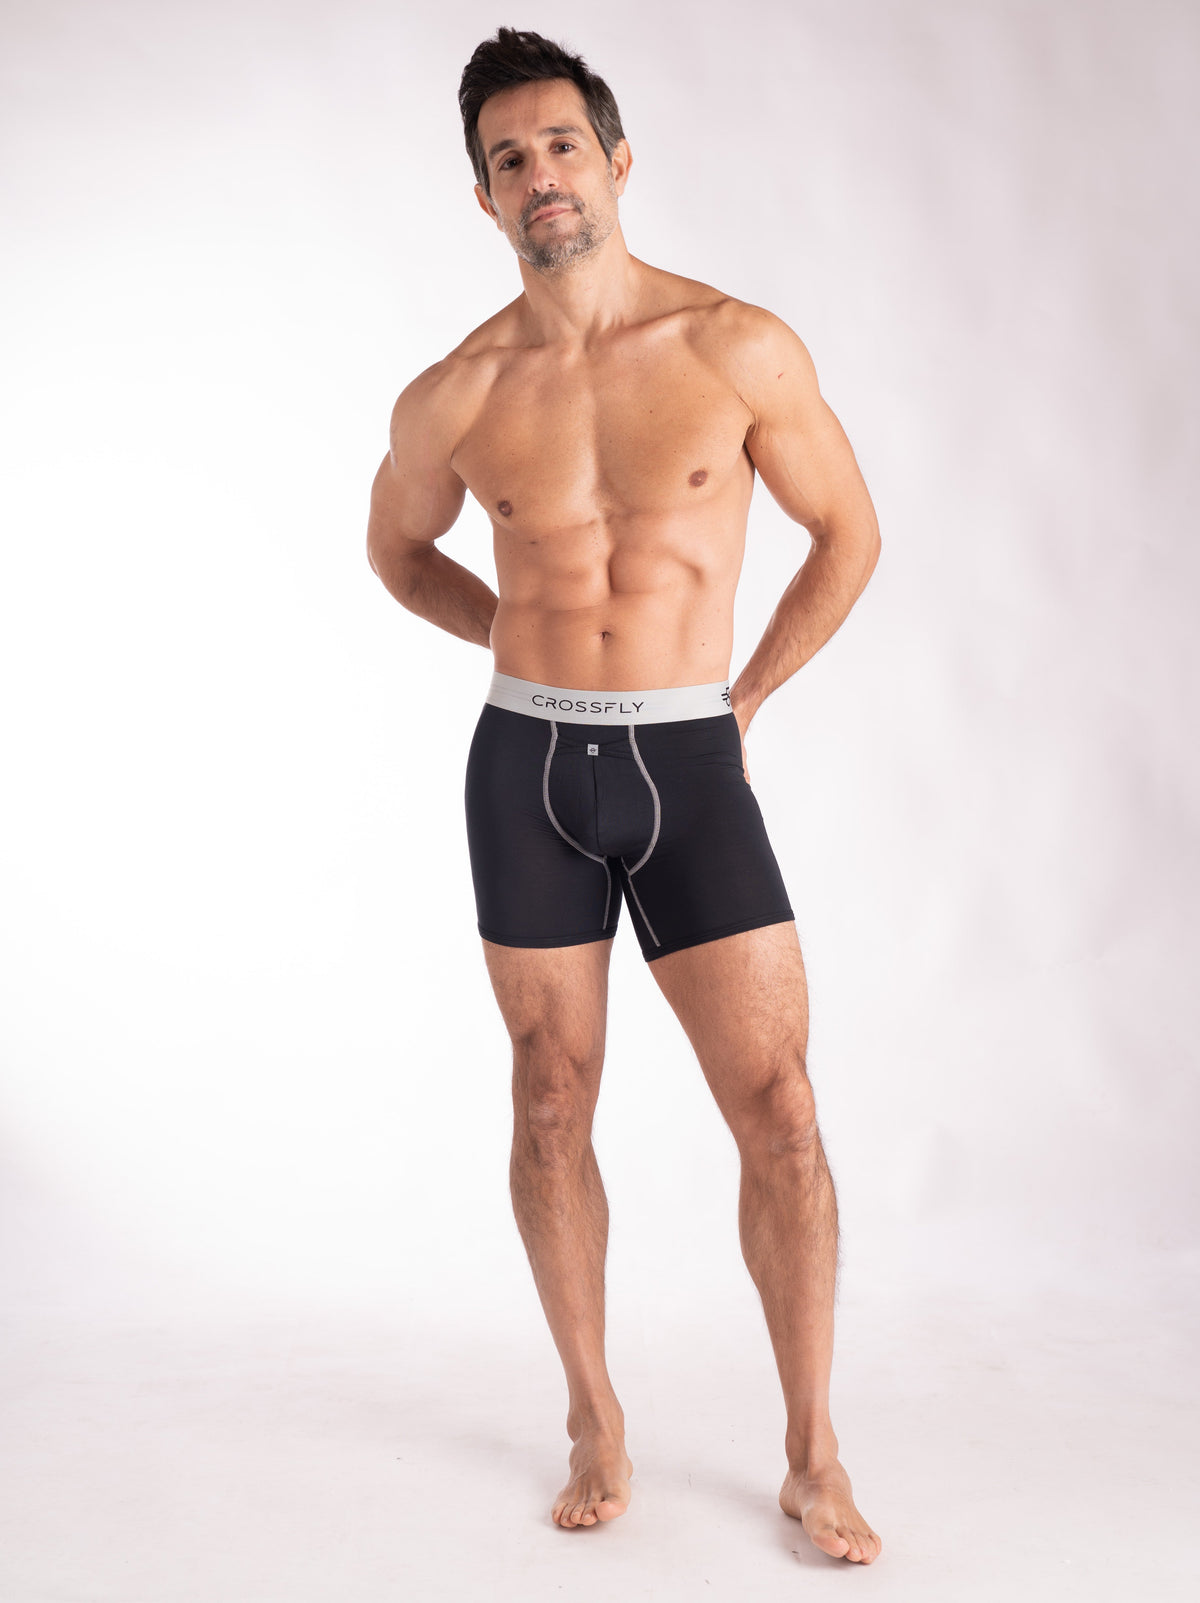 Crossfly men&#39;s IKON X 6&quot; black / silver boxers from the Everyday series, featuring X-Fly and Coccoon internal pocket support.